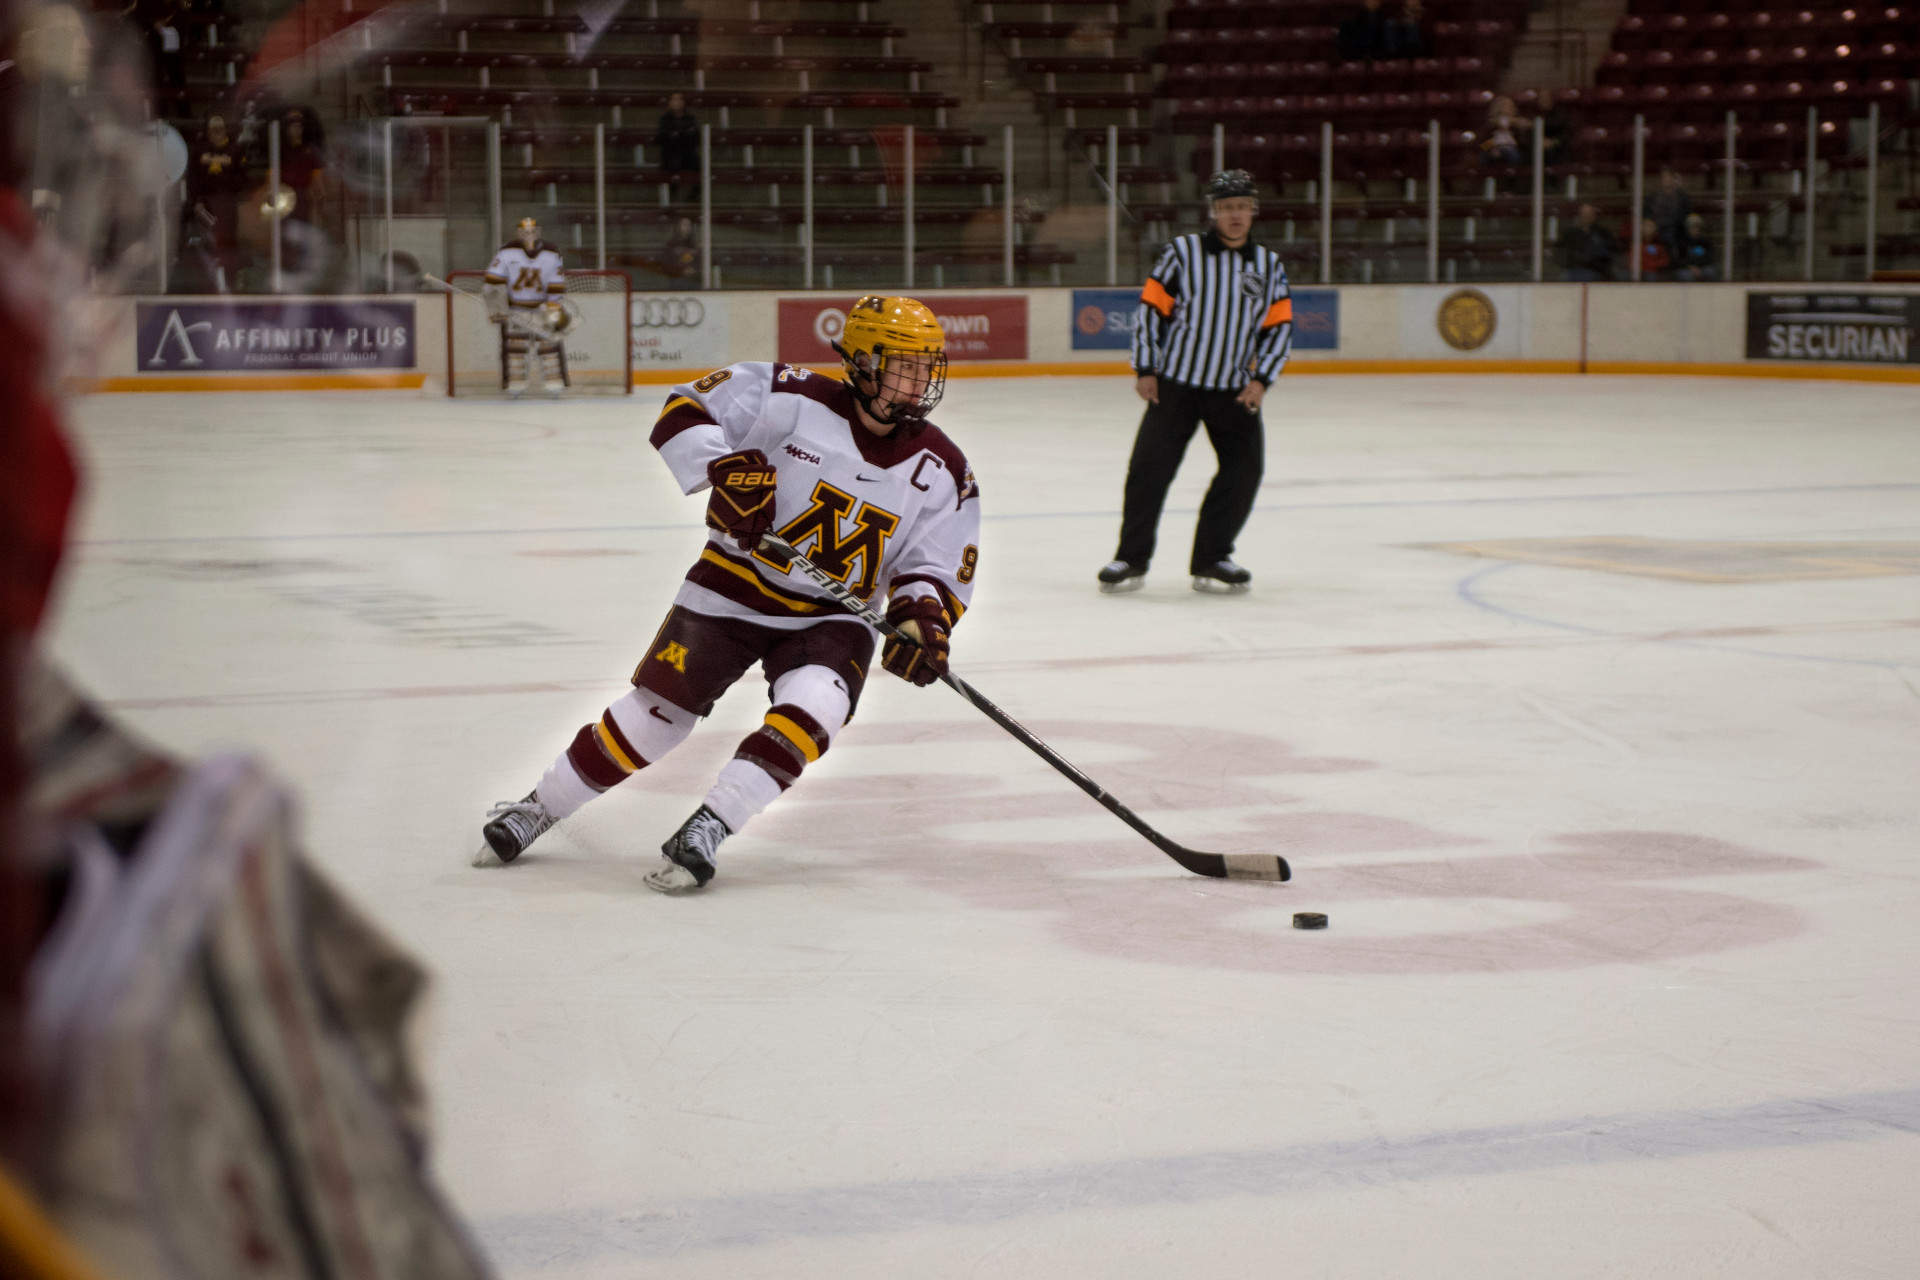 A U of M hockey player plays on the ice